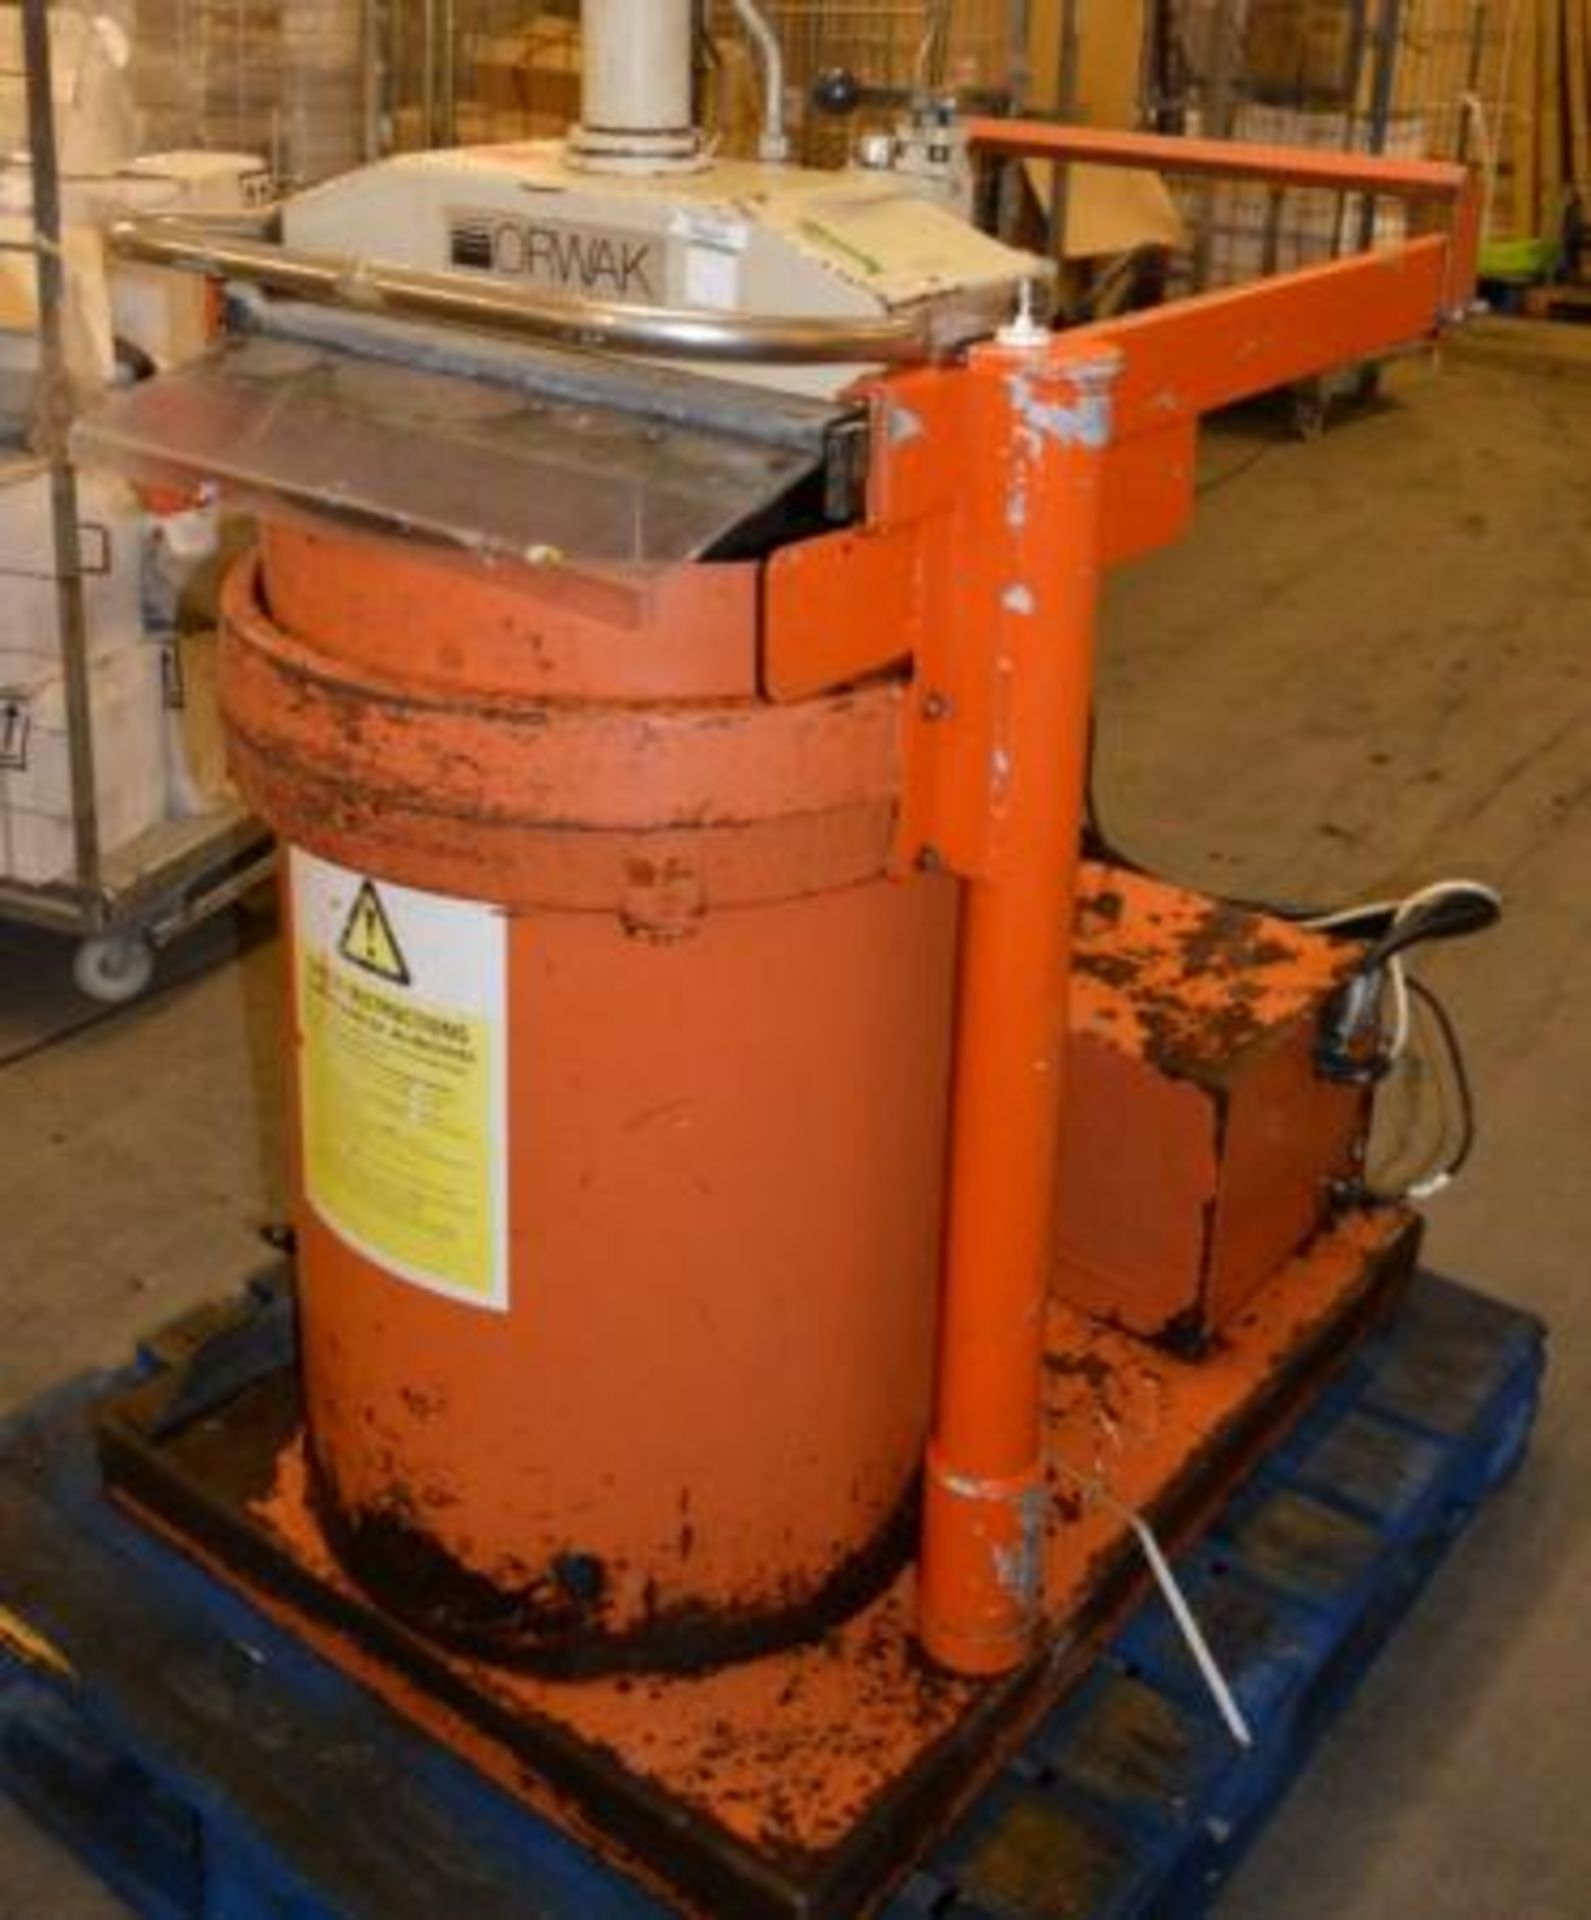 1 x Orwak 5030 Waste Compactor Bailer - Used For Compacting Recyclable or Non-Recyclable Waste - Image 2 of 4